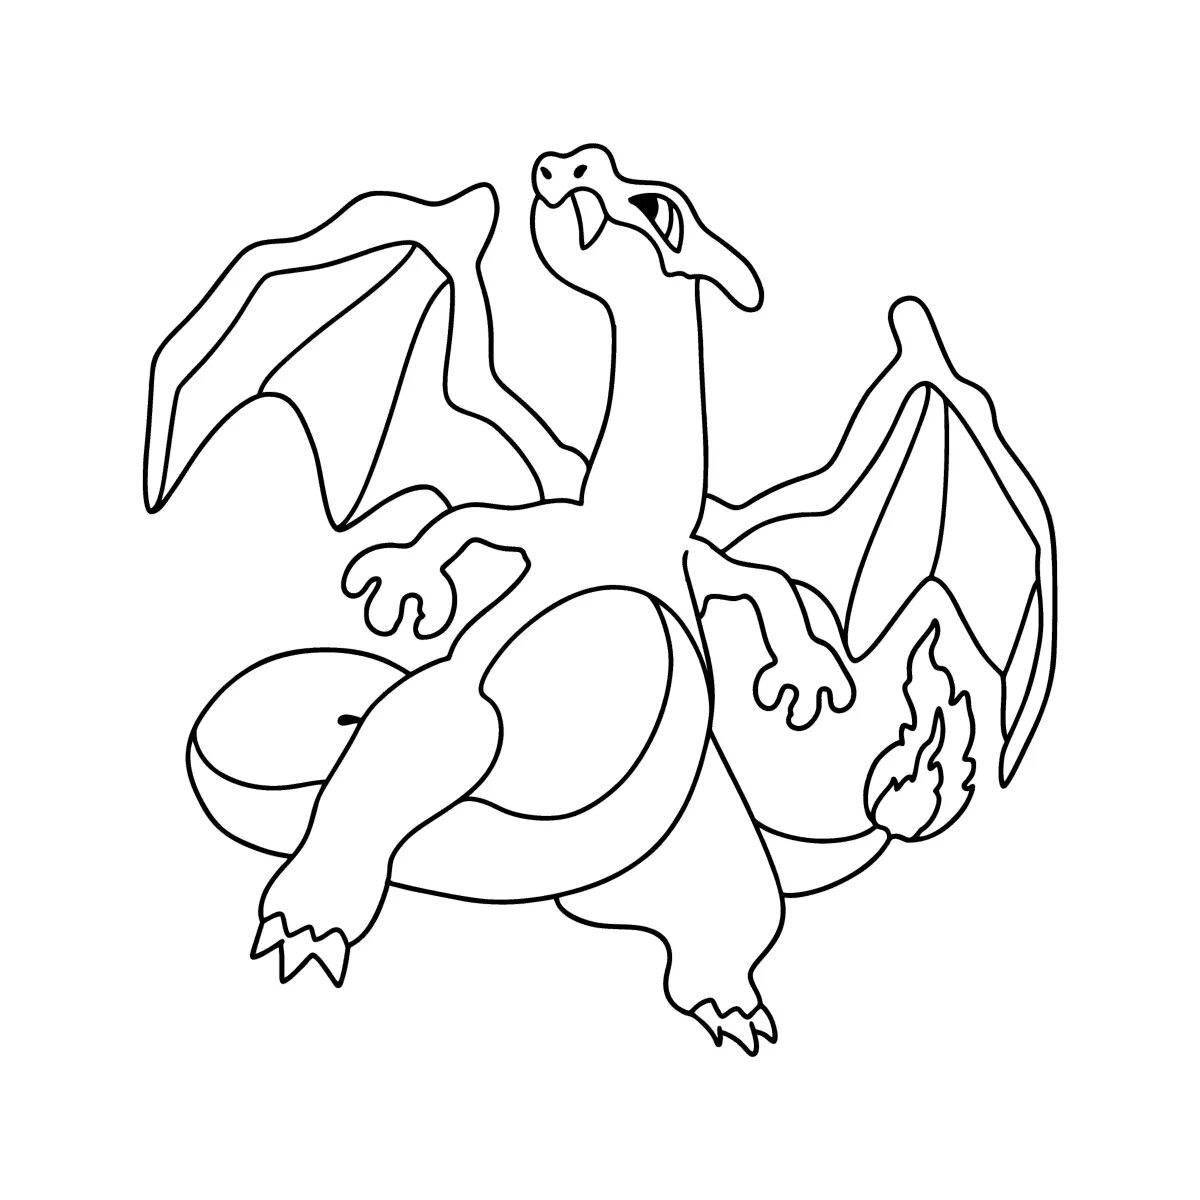 Awesome Charizard pokemon coloring book